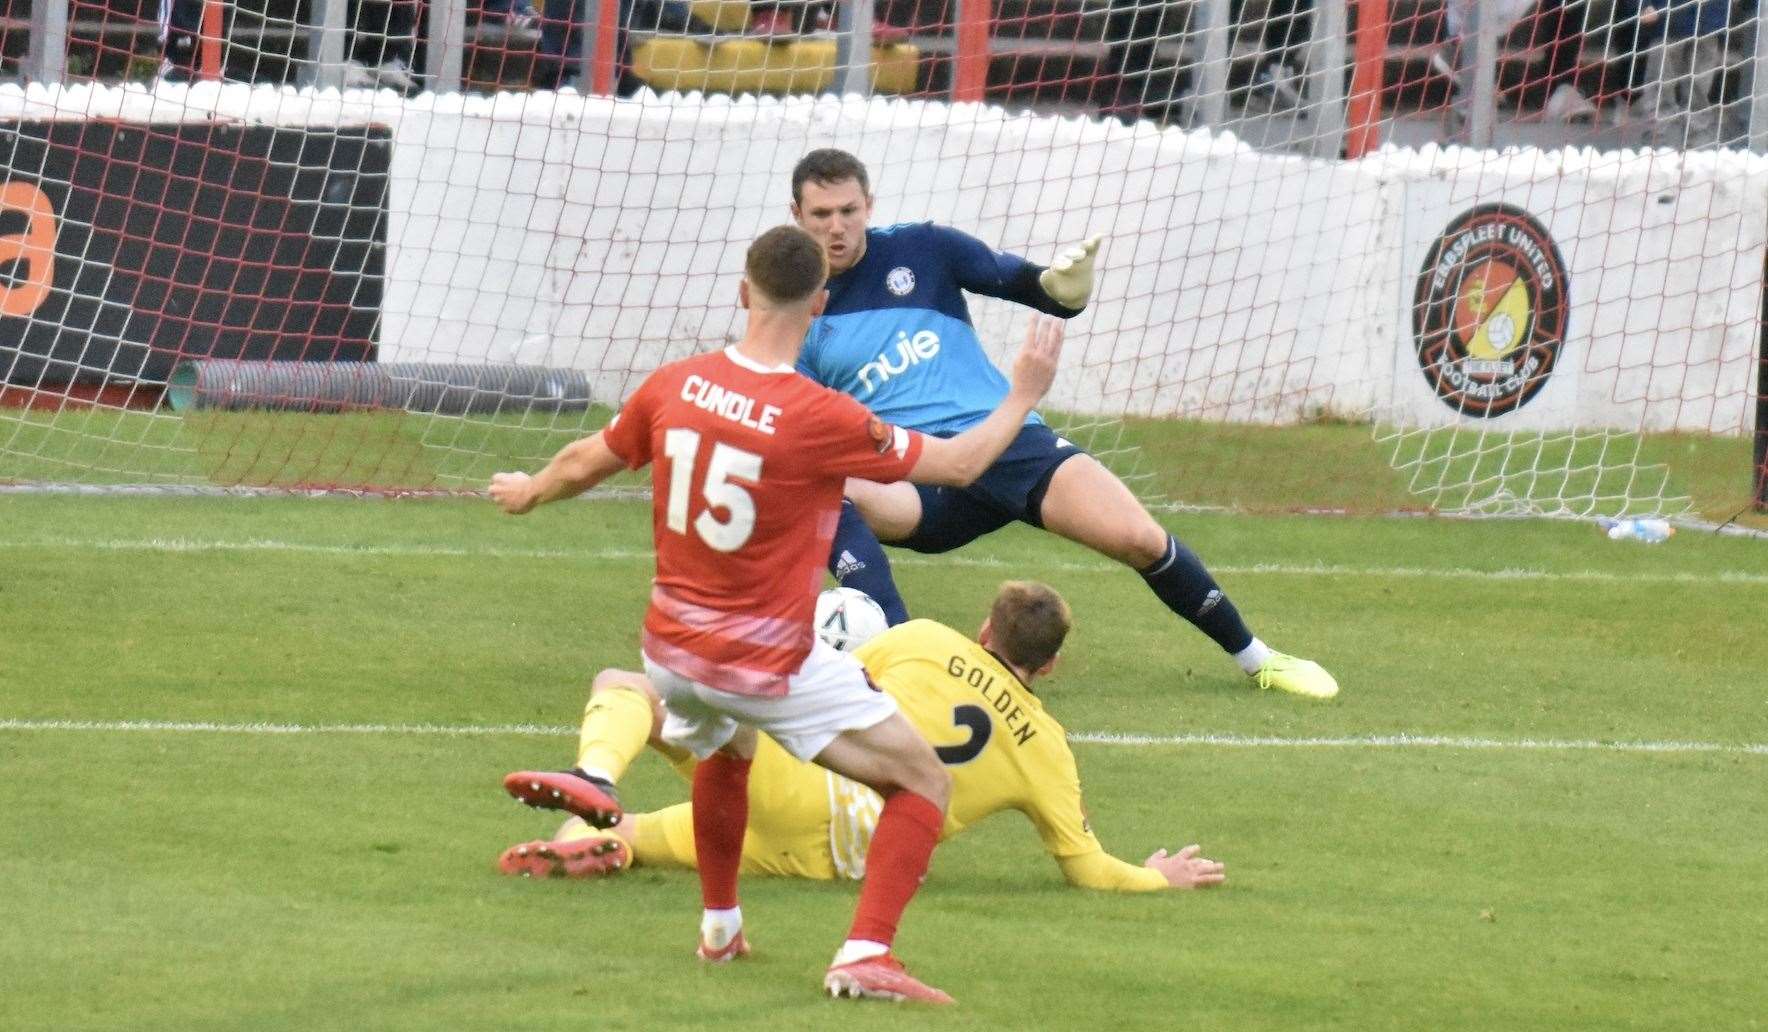 Greg Cundle's shot is saved by the legs of keeper Sam Johnson. Picture: Ed Miller/EUFC